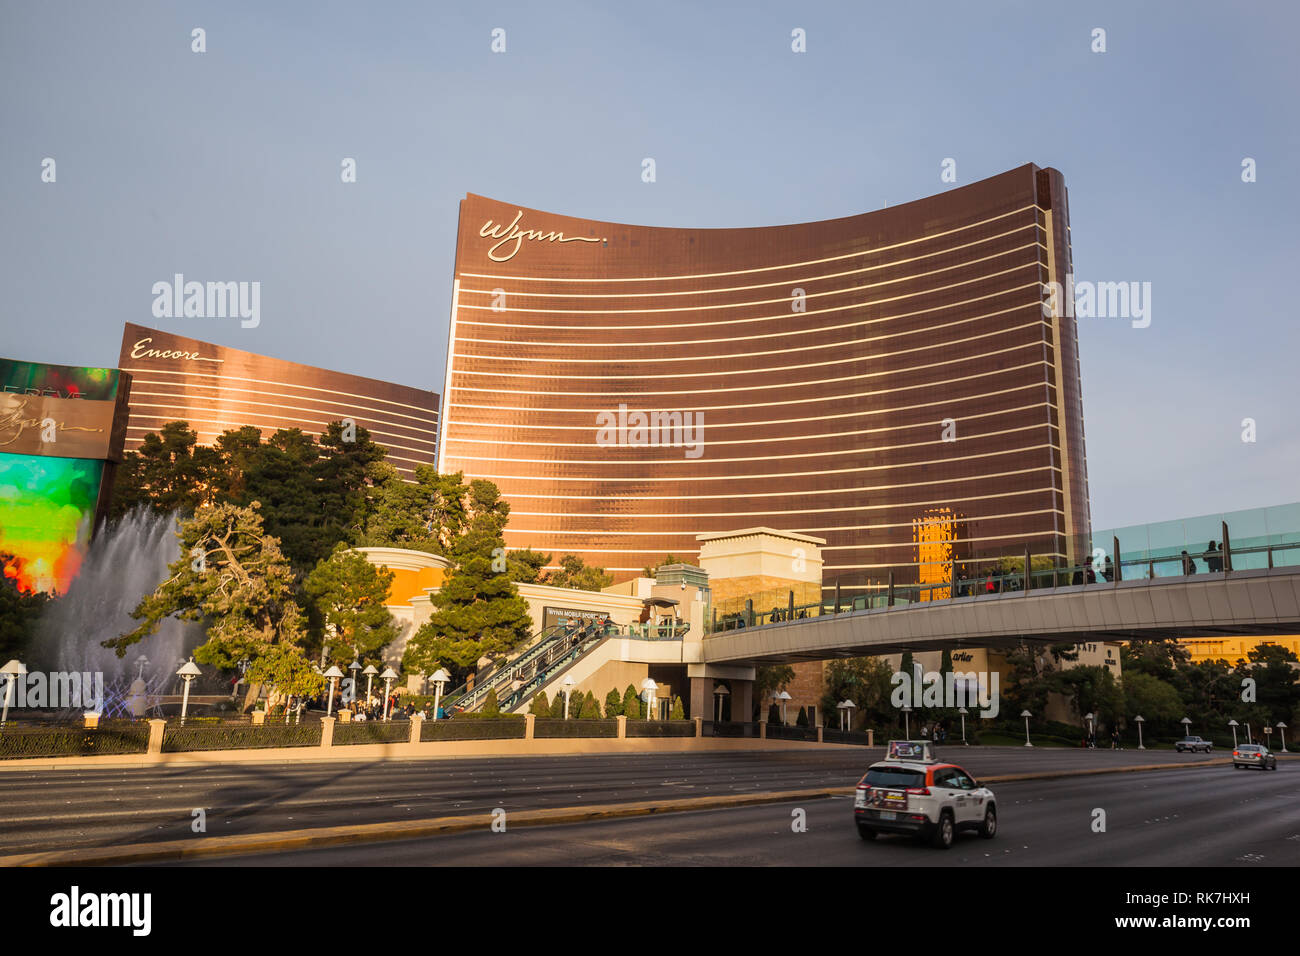 View of Wynn,  a luxury resort and casino resort located on the Las Vegas Strip in Paradise, Nevada, United States. Stock Photo